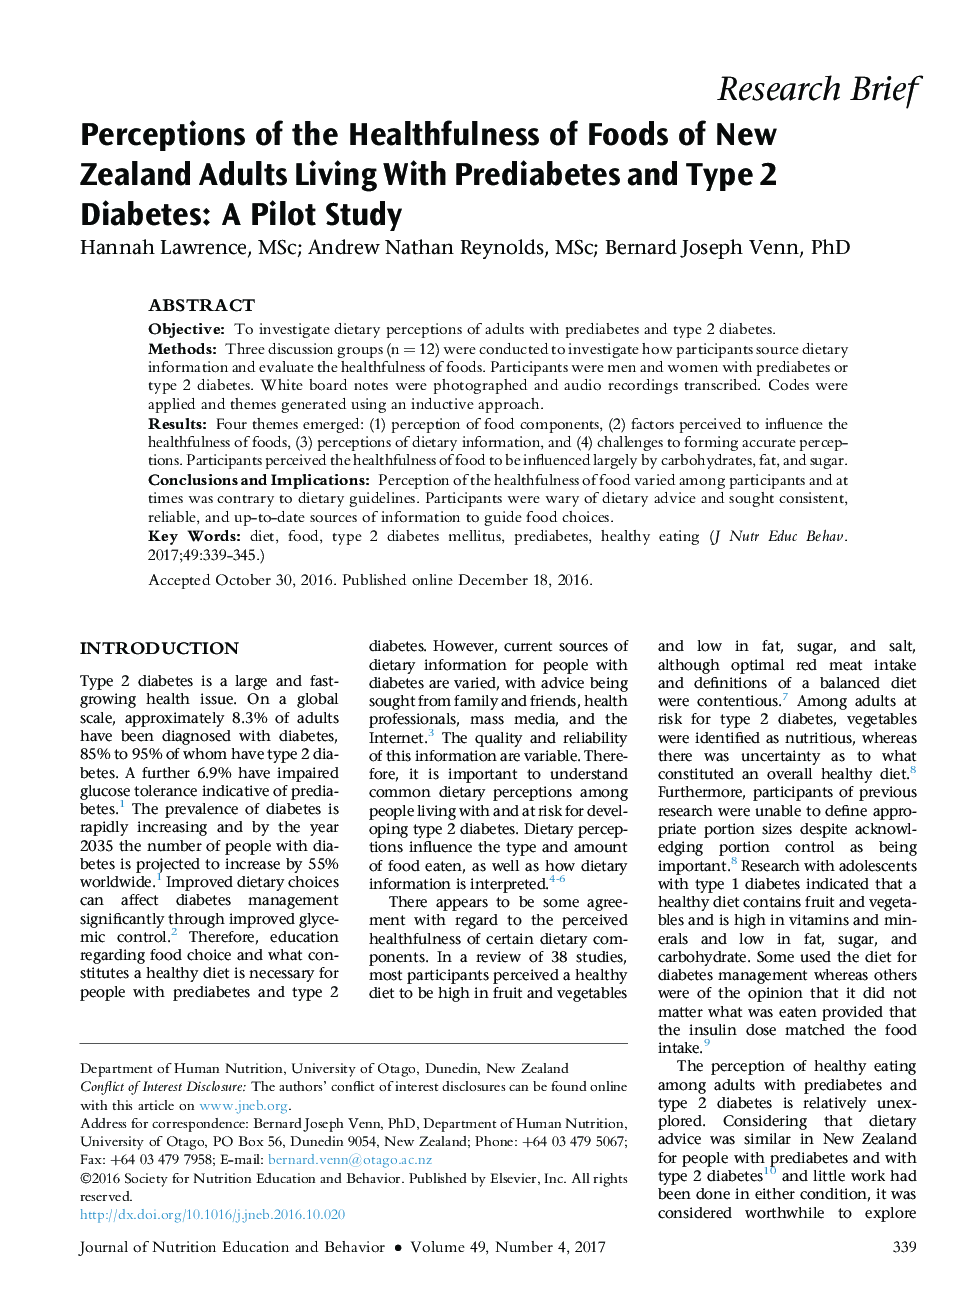 Perceptions of the Healthfulness of Foods of New Zealand Adults Living With Prediabetes and Type 2 Diabetes: A Pilot Study